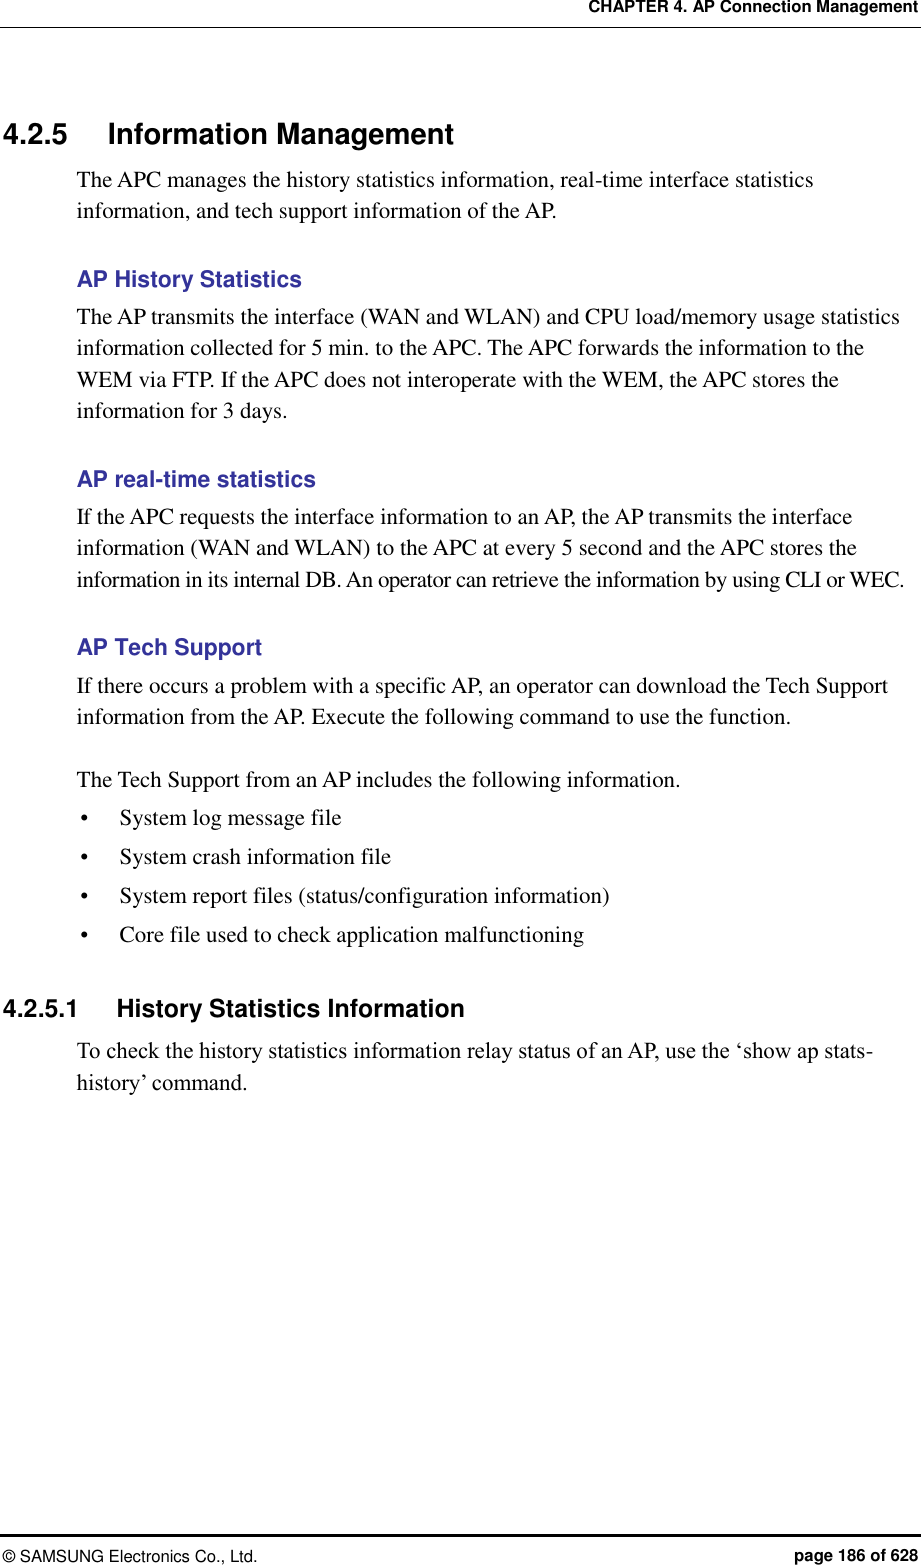 CHAPTER 4. AP Connection Management ©  SAMSUNG Electronics Co., Ltd.  page 186 of 628 4.2.5  Information Management The APC manages the history statistics information, real-time interface statistics information, and tech support information of the AP.    AP History Statistics The AP transmits the interface (WAN and WLAN) and CPU load/memory usage statistics information collected for 5 min. to the APC. The APC forwards the information to the WEM via FTP. If the APC does not interoperate with the WEM, the APC stores the information for 3 days.  AP real-time statistics If the APC requests the interface information to an AP, the AP transmits the interface information (WAN and WLAN) to the APC at every 5 second and the APC stores the information in its internal DB. An operator can retrieve the information by using CLI or WEC.    AP Tech Support If there occurs a problem with a specific AP, an operator can download the Tech Support information from the AP. Execute the following command to use the function.  The Tech Support from an AP includes the following information.  System log message file  System crash information file  System report files (status/configuration information)  Core file used to check application malfunctioning  4.2.5.1  History Statistics Information To check the history statistics information relay status of an AP, use the ‘show ap stats-history’ command.  